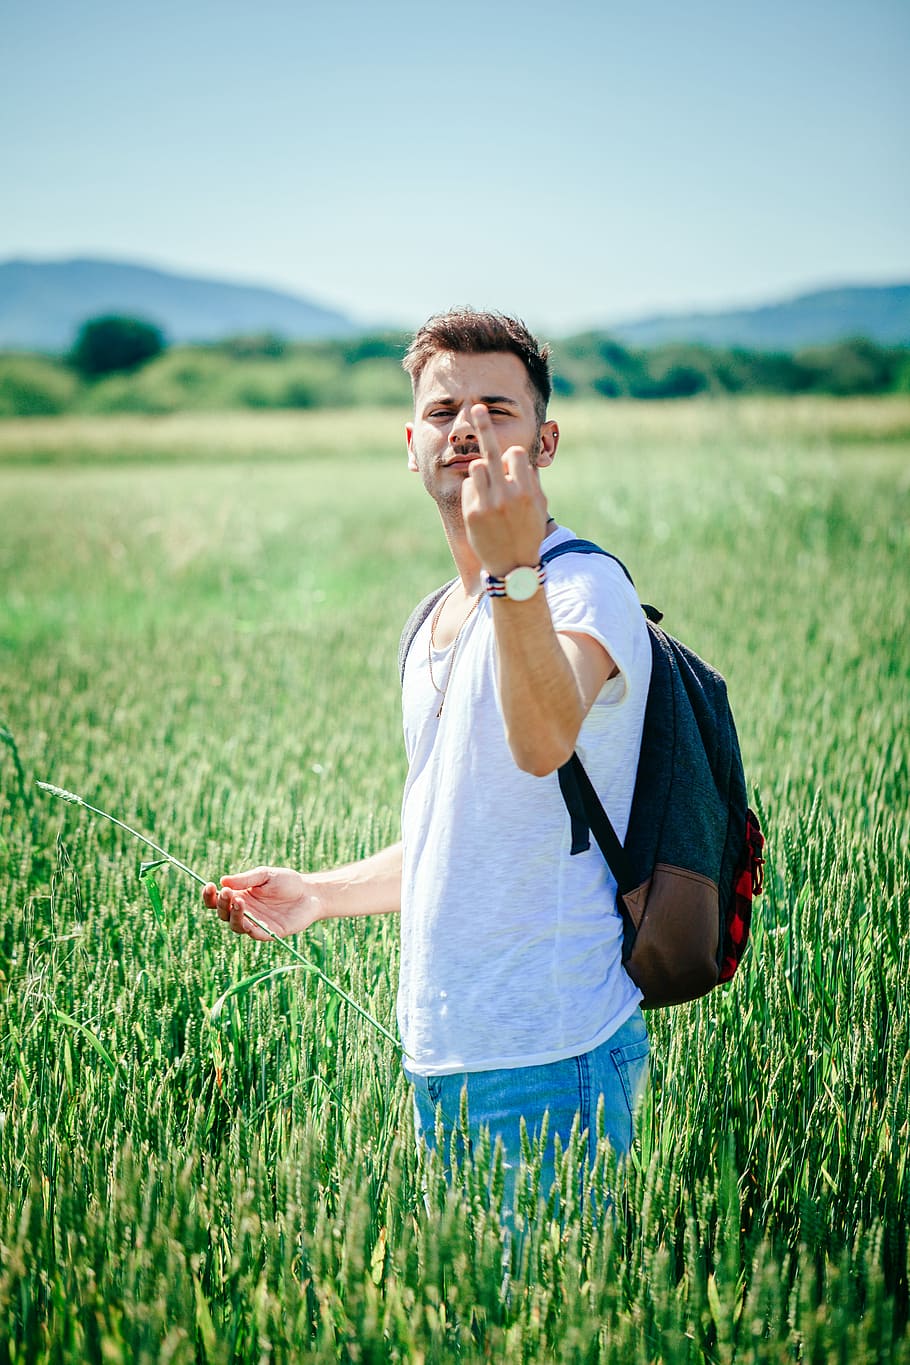 man standing on green plant field, man in white shirt showing middle finger during daytime